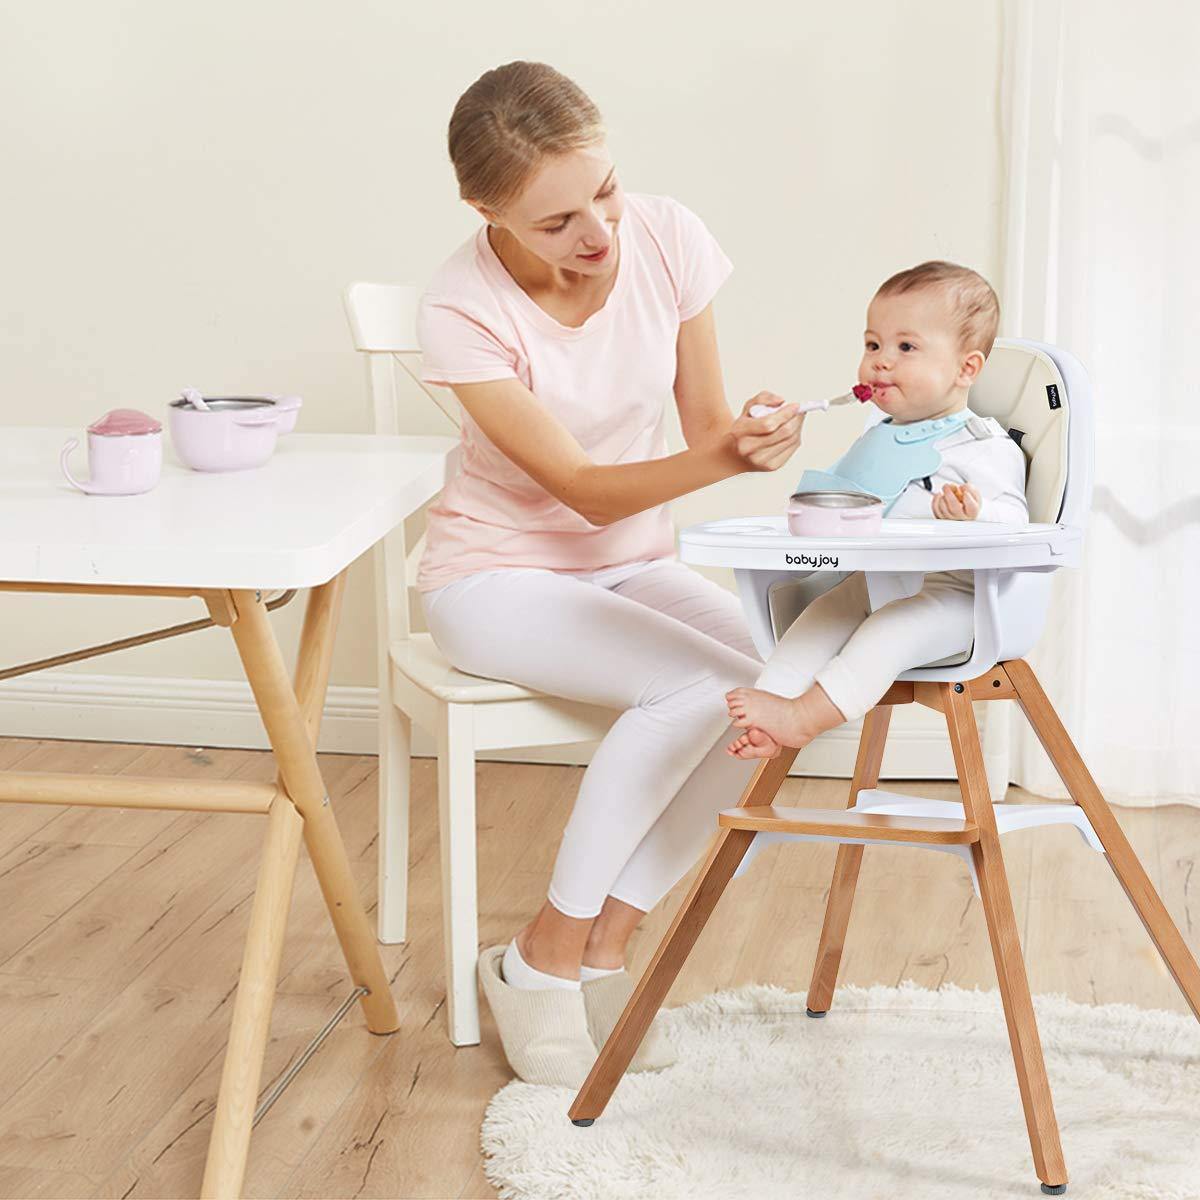 BABY JOY 3 in 1 High Chair, Baby Eat & Grow Convertible Wooden High Chair/Rocking Chair/Booster Seat/Toddler Chair